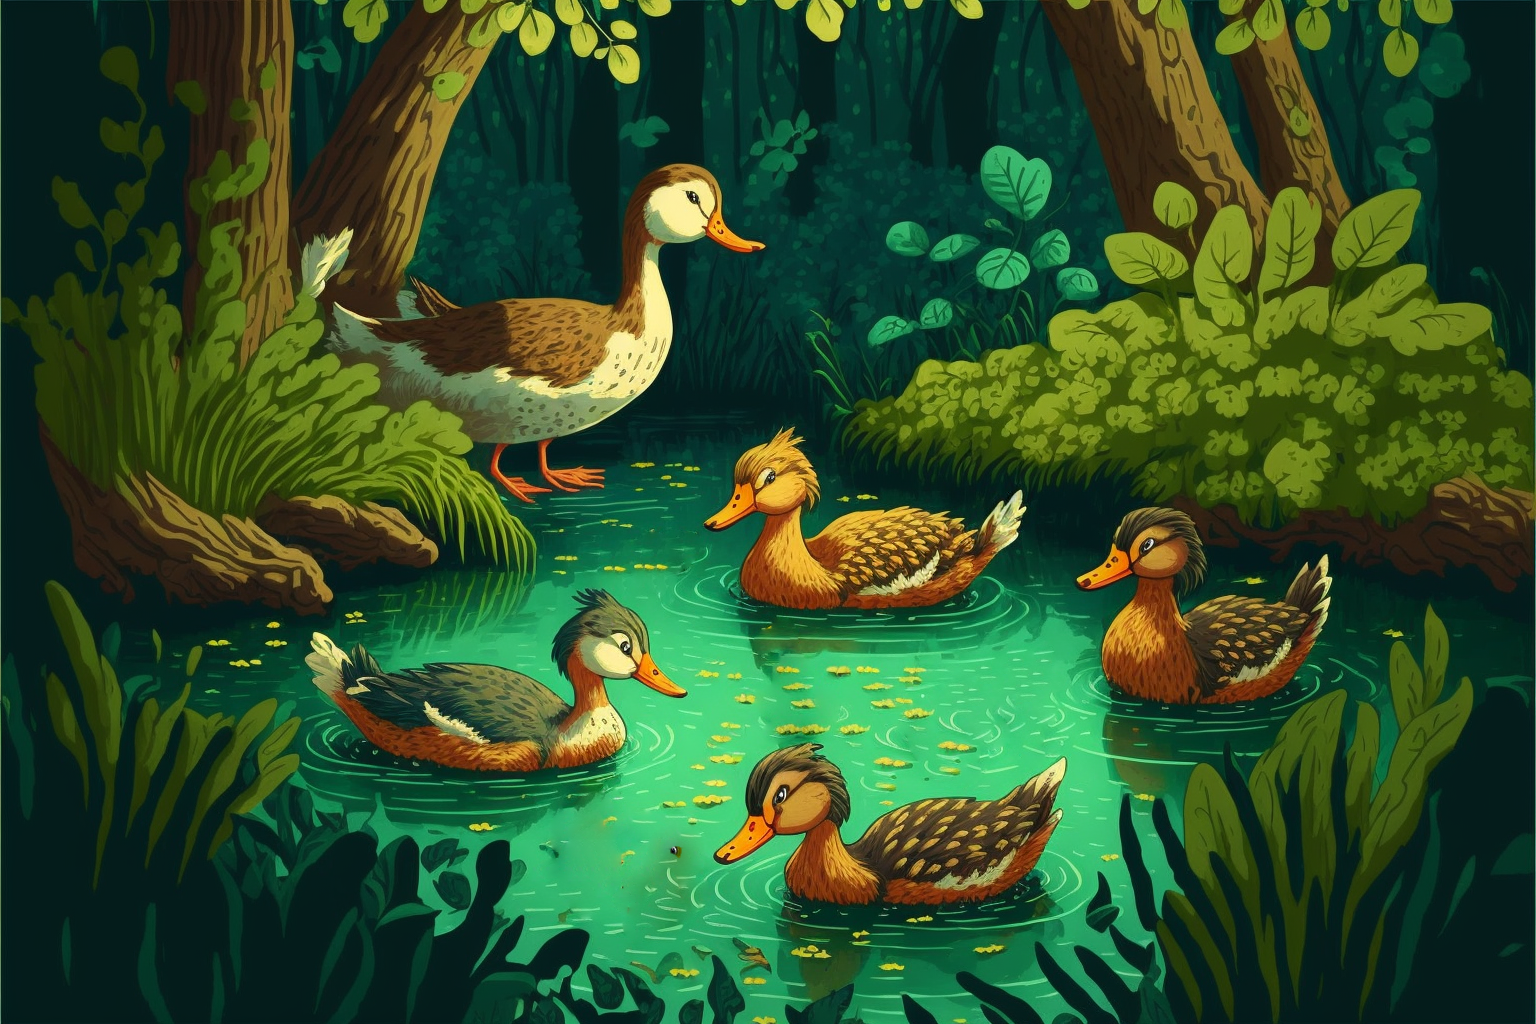 The Tortoise and the Ducks